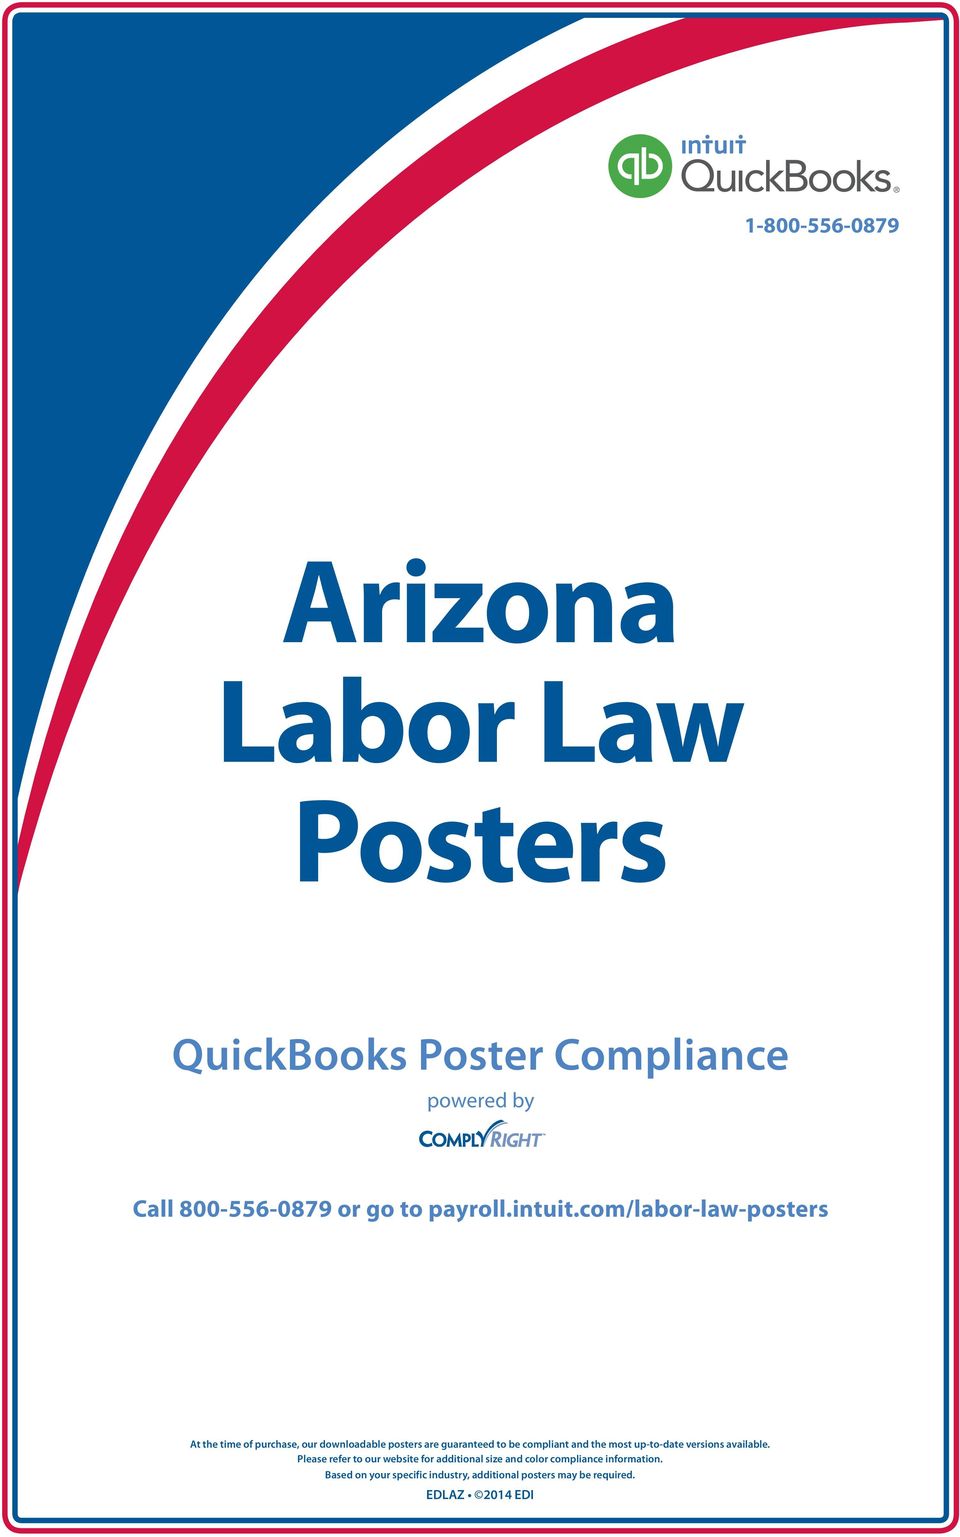 com/labor-law-posters At the time of purchase, our downloadable posters are guaranteed to be compliant and